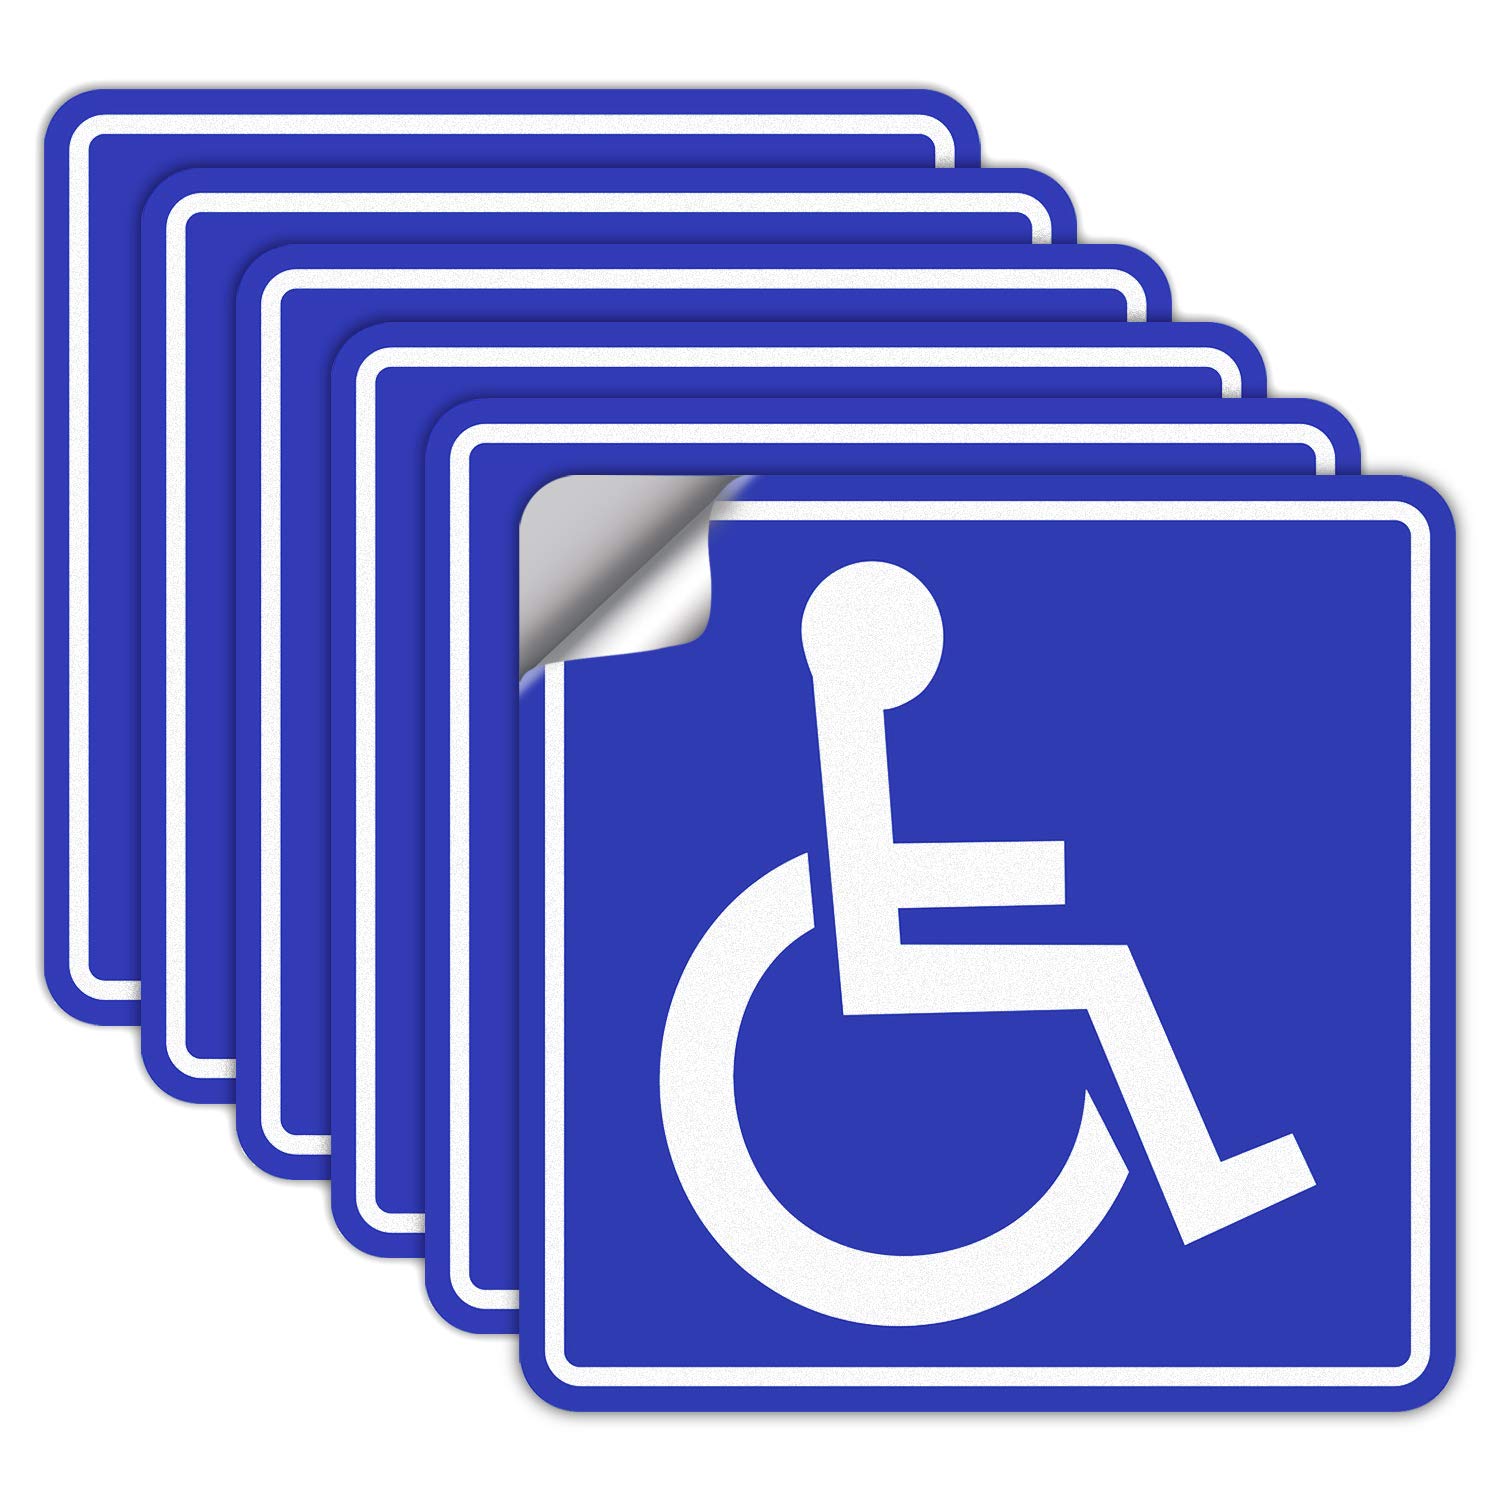 Handicap Stickers Decals, Handicap Stickers, Disabled Wheelchair Sign, 6 Pack, 6x6 inch Self-Adhesive Vinyl Decal Stickers, Reflective, UV Protected, Waterproof